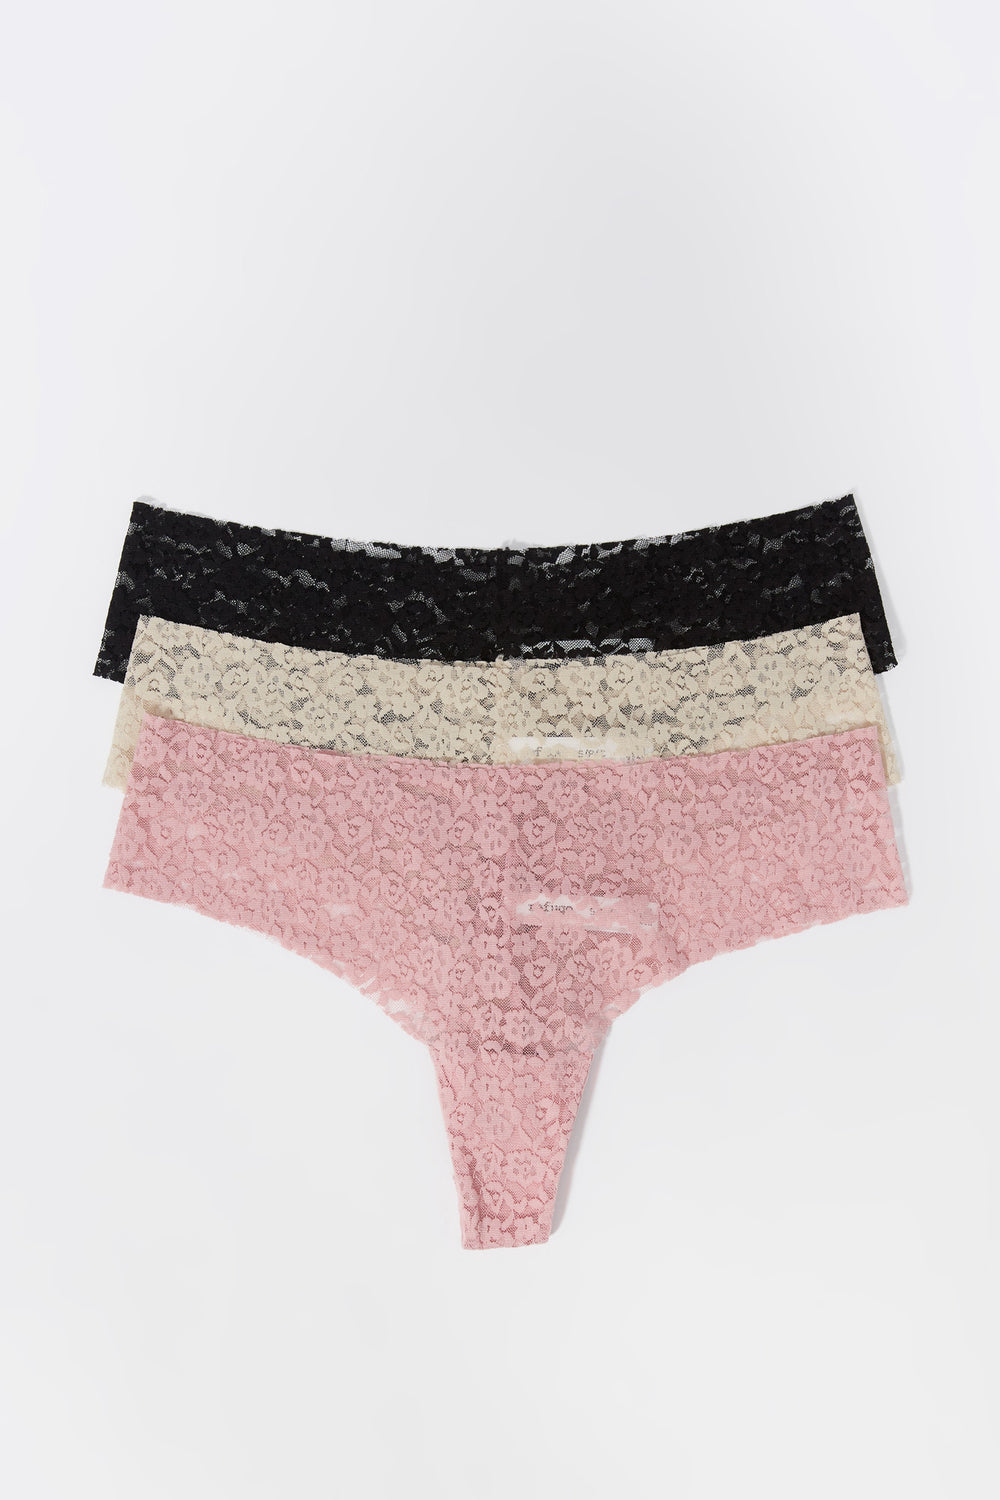 Floral Lace Thong Panty (3 Pack) Floral Lace Thong Panty (3 Pack) 9